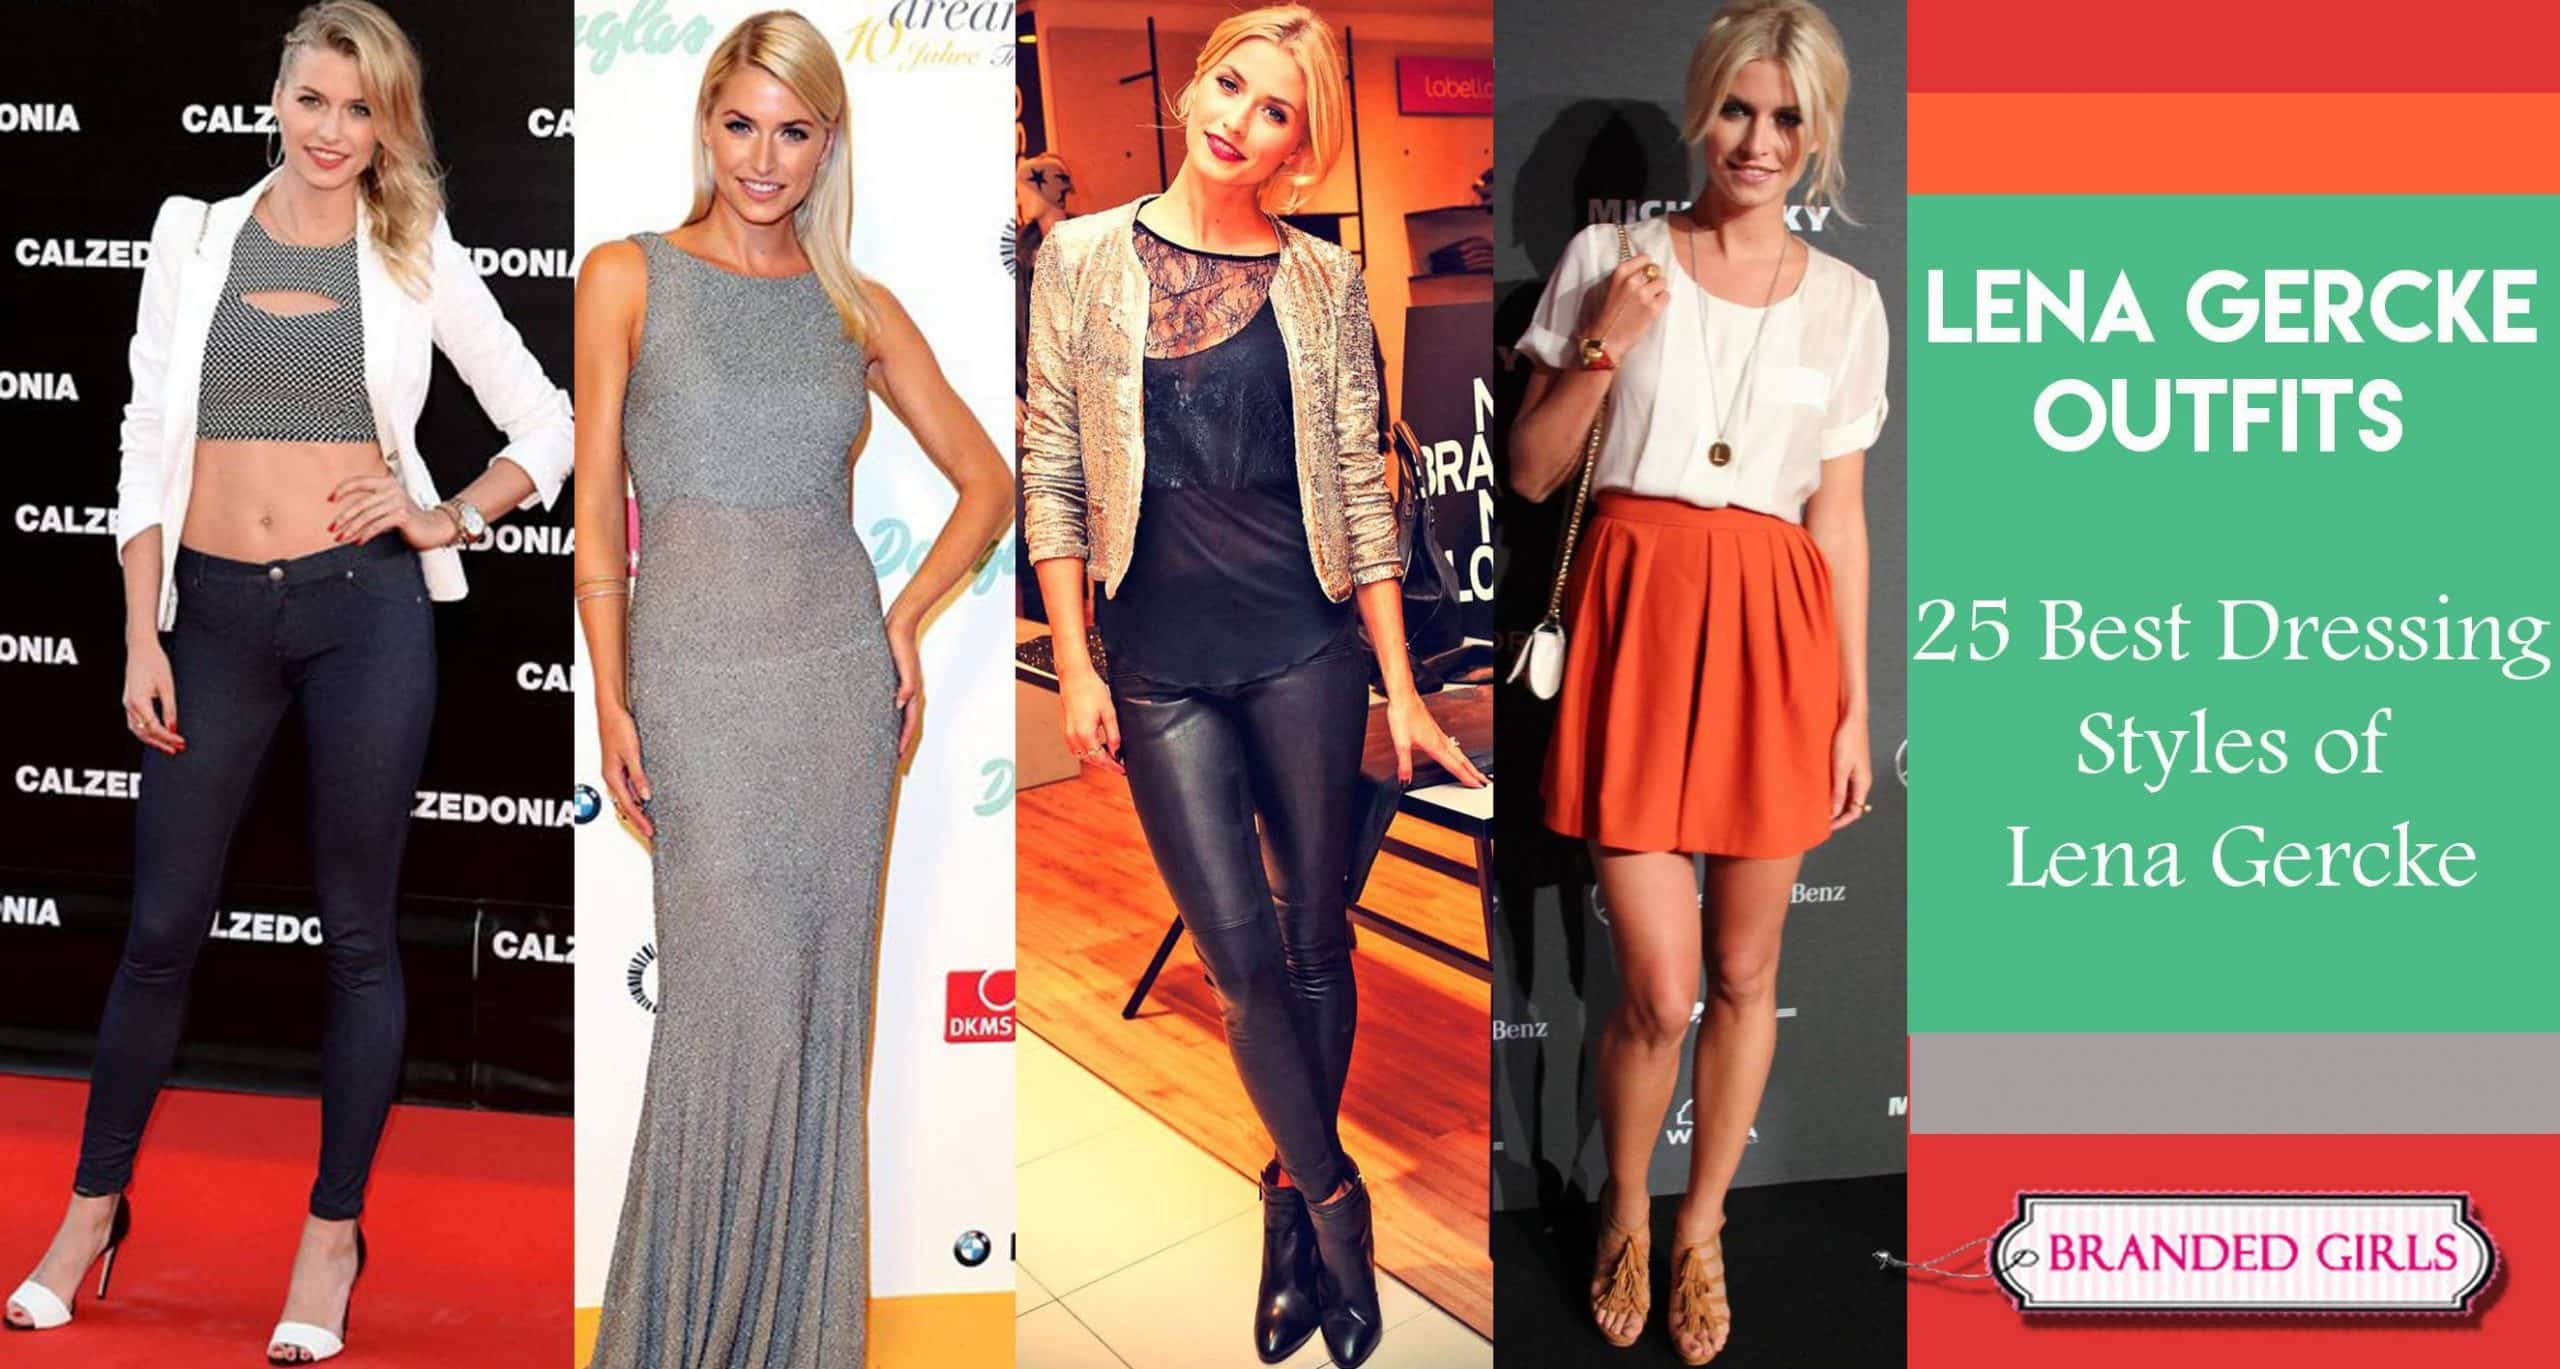 Lena Gercke Outfits-25 Best Dressing Style of Lena Gercke to Copy